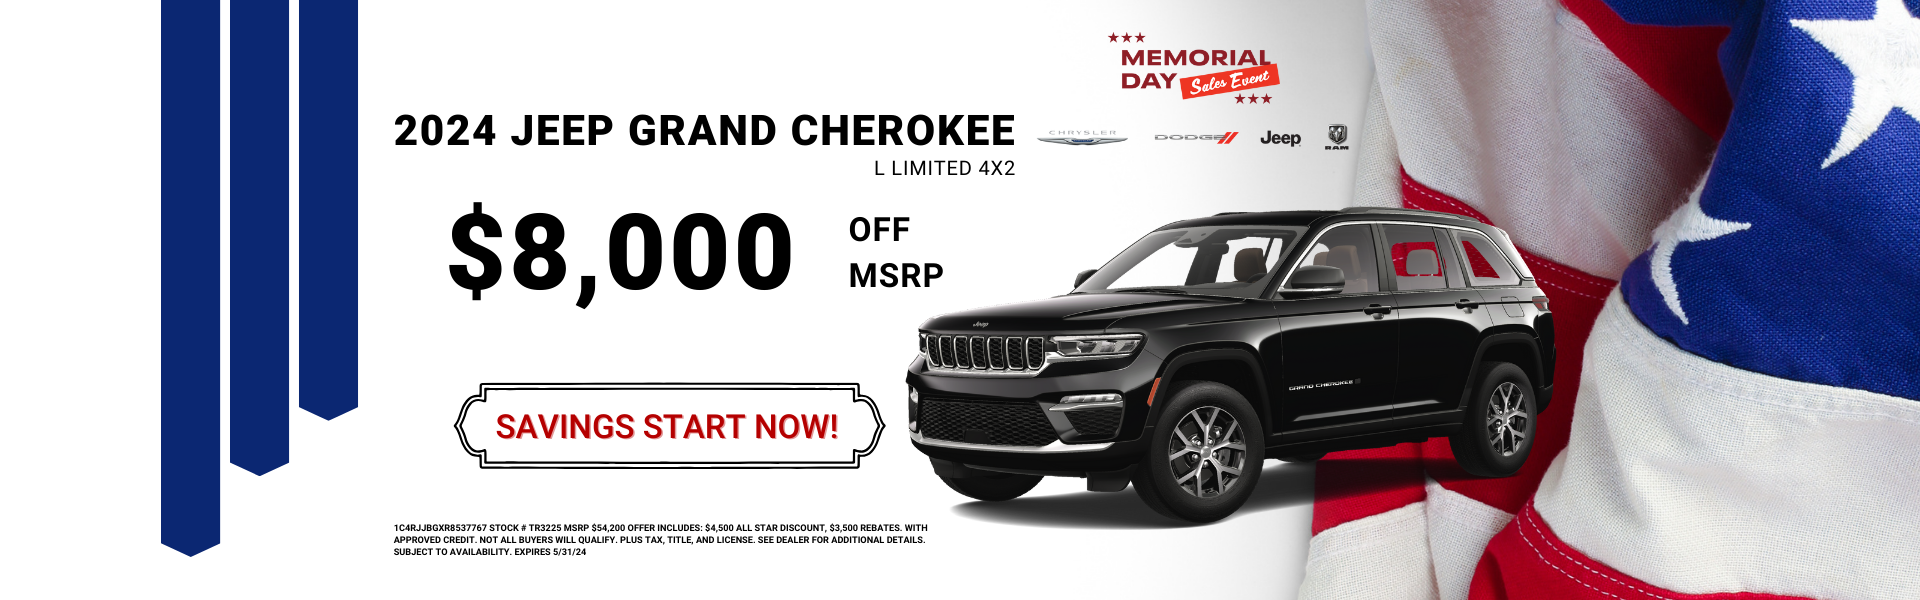 Jeep Grand Cherokee Summer Offer Memorial Day